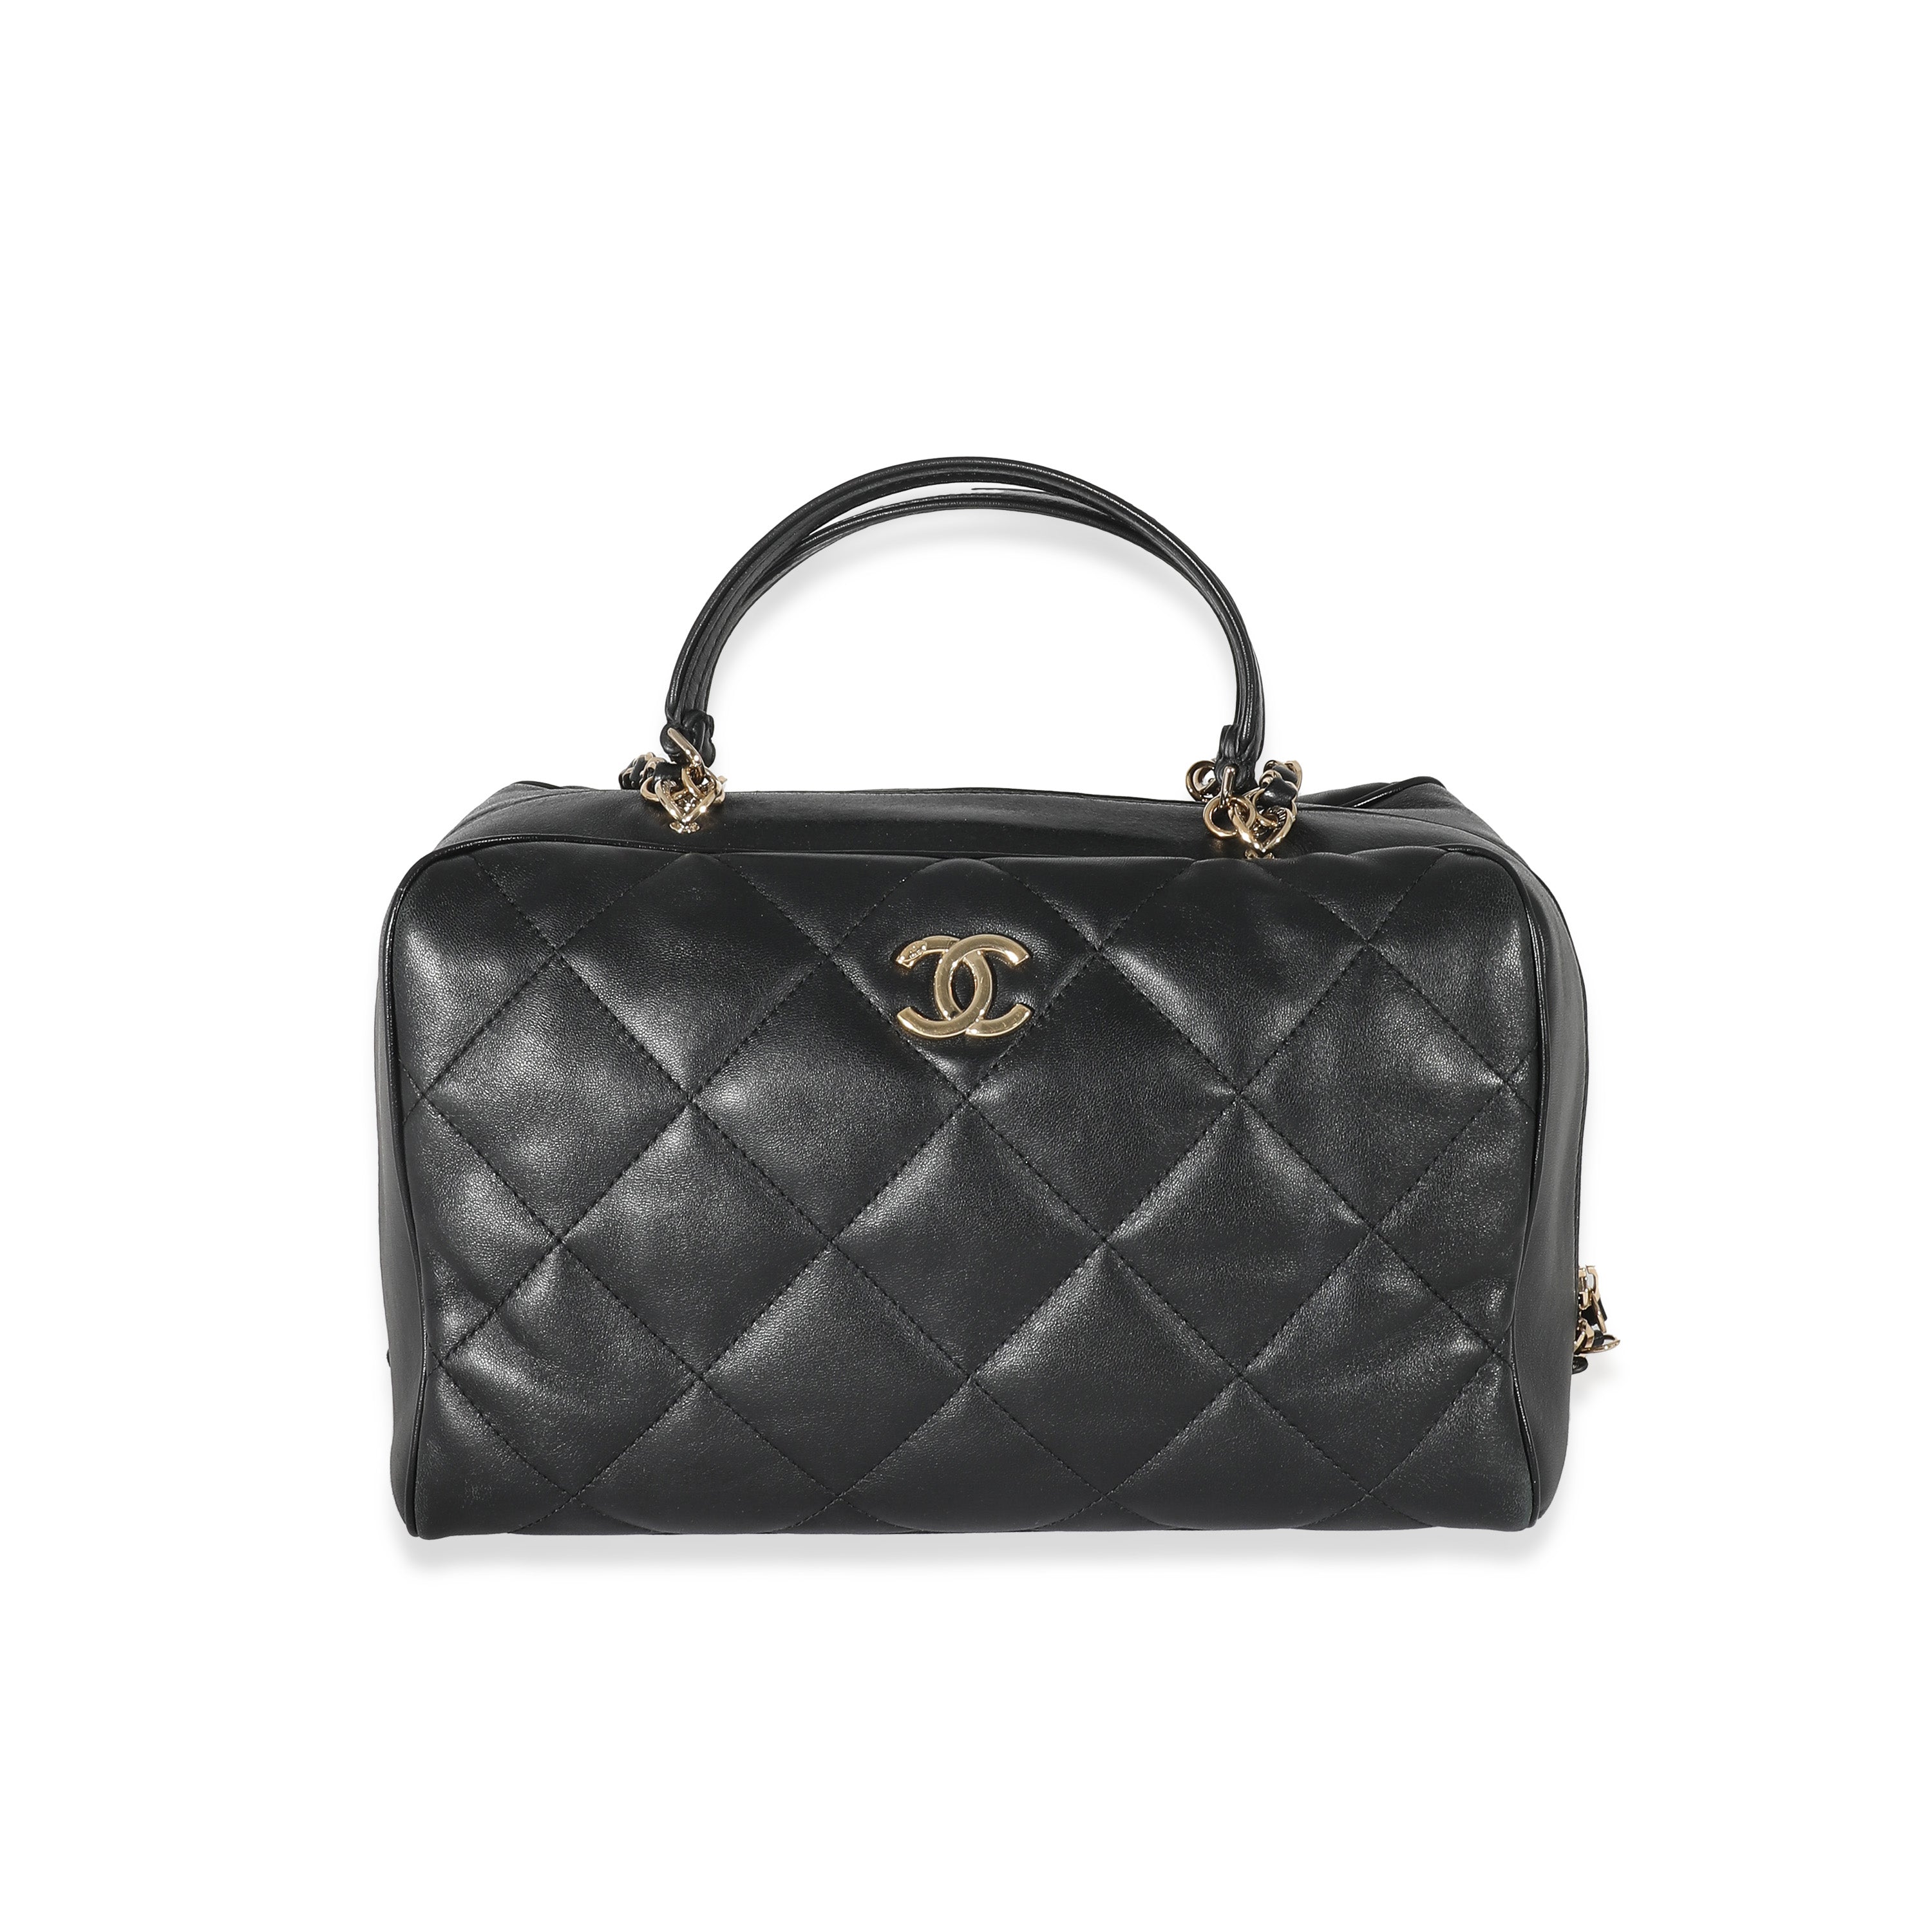 Chanel Beige Quilted Lambskin CC Trendy Bowling Bag, myGemma